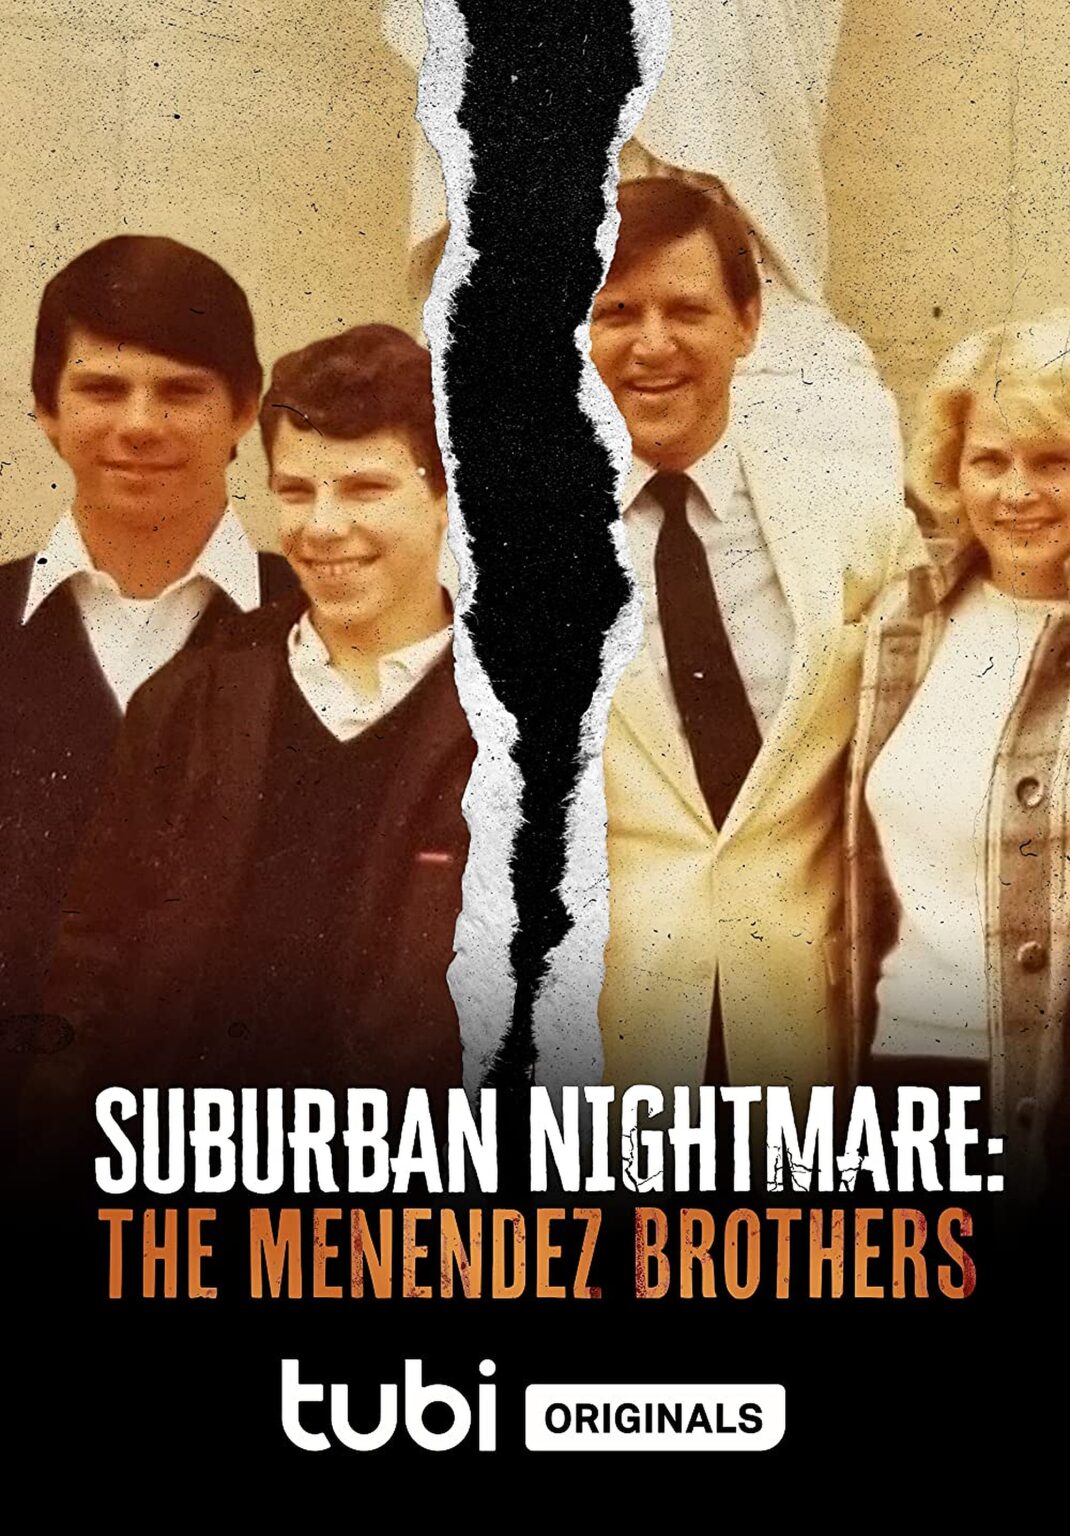 The story of the Menendez brothers is out! Could a change in public perception influence their fate now after all of these years?